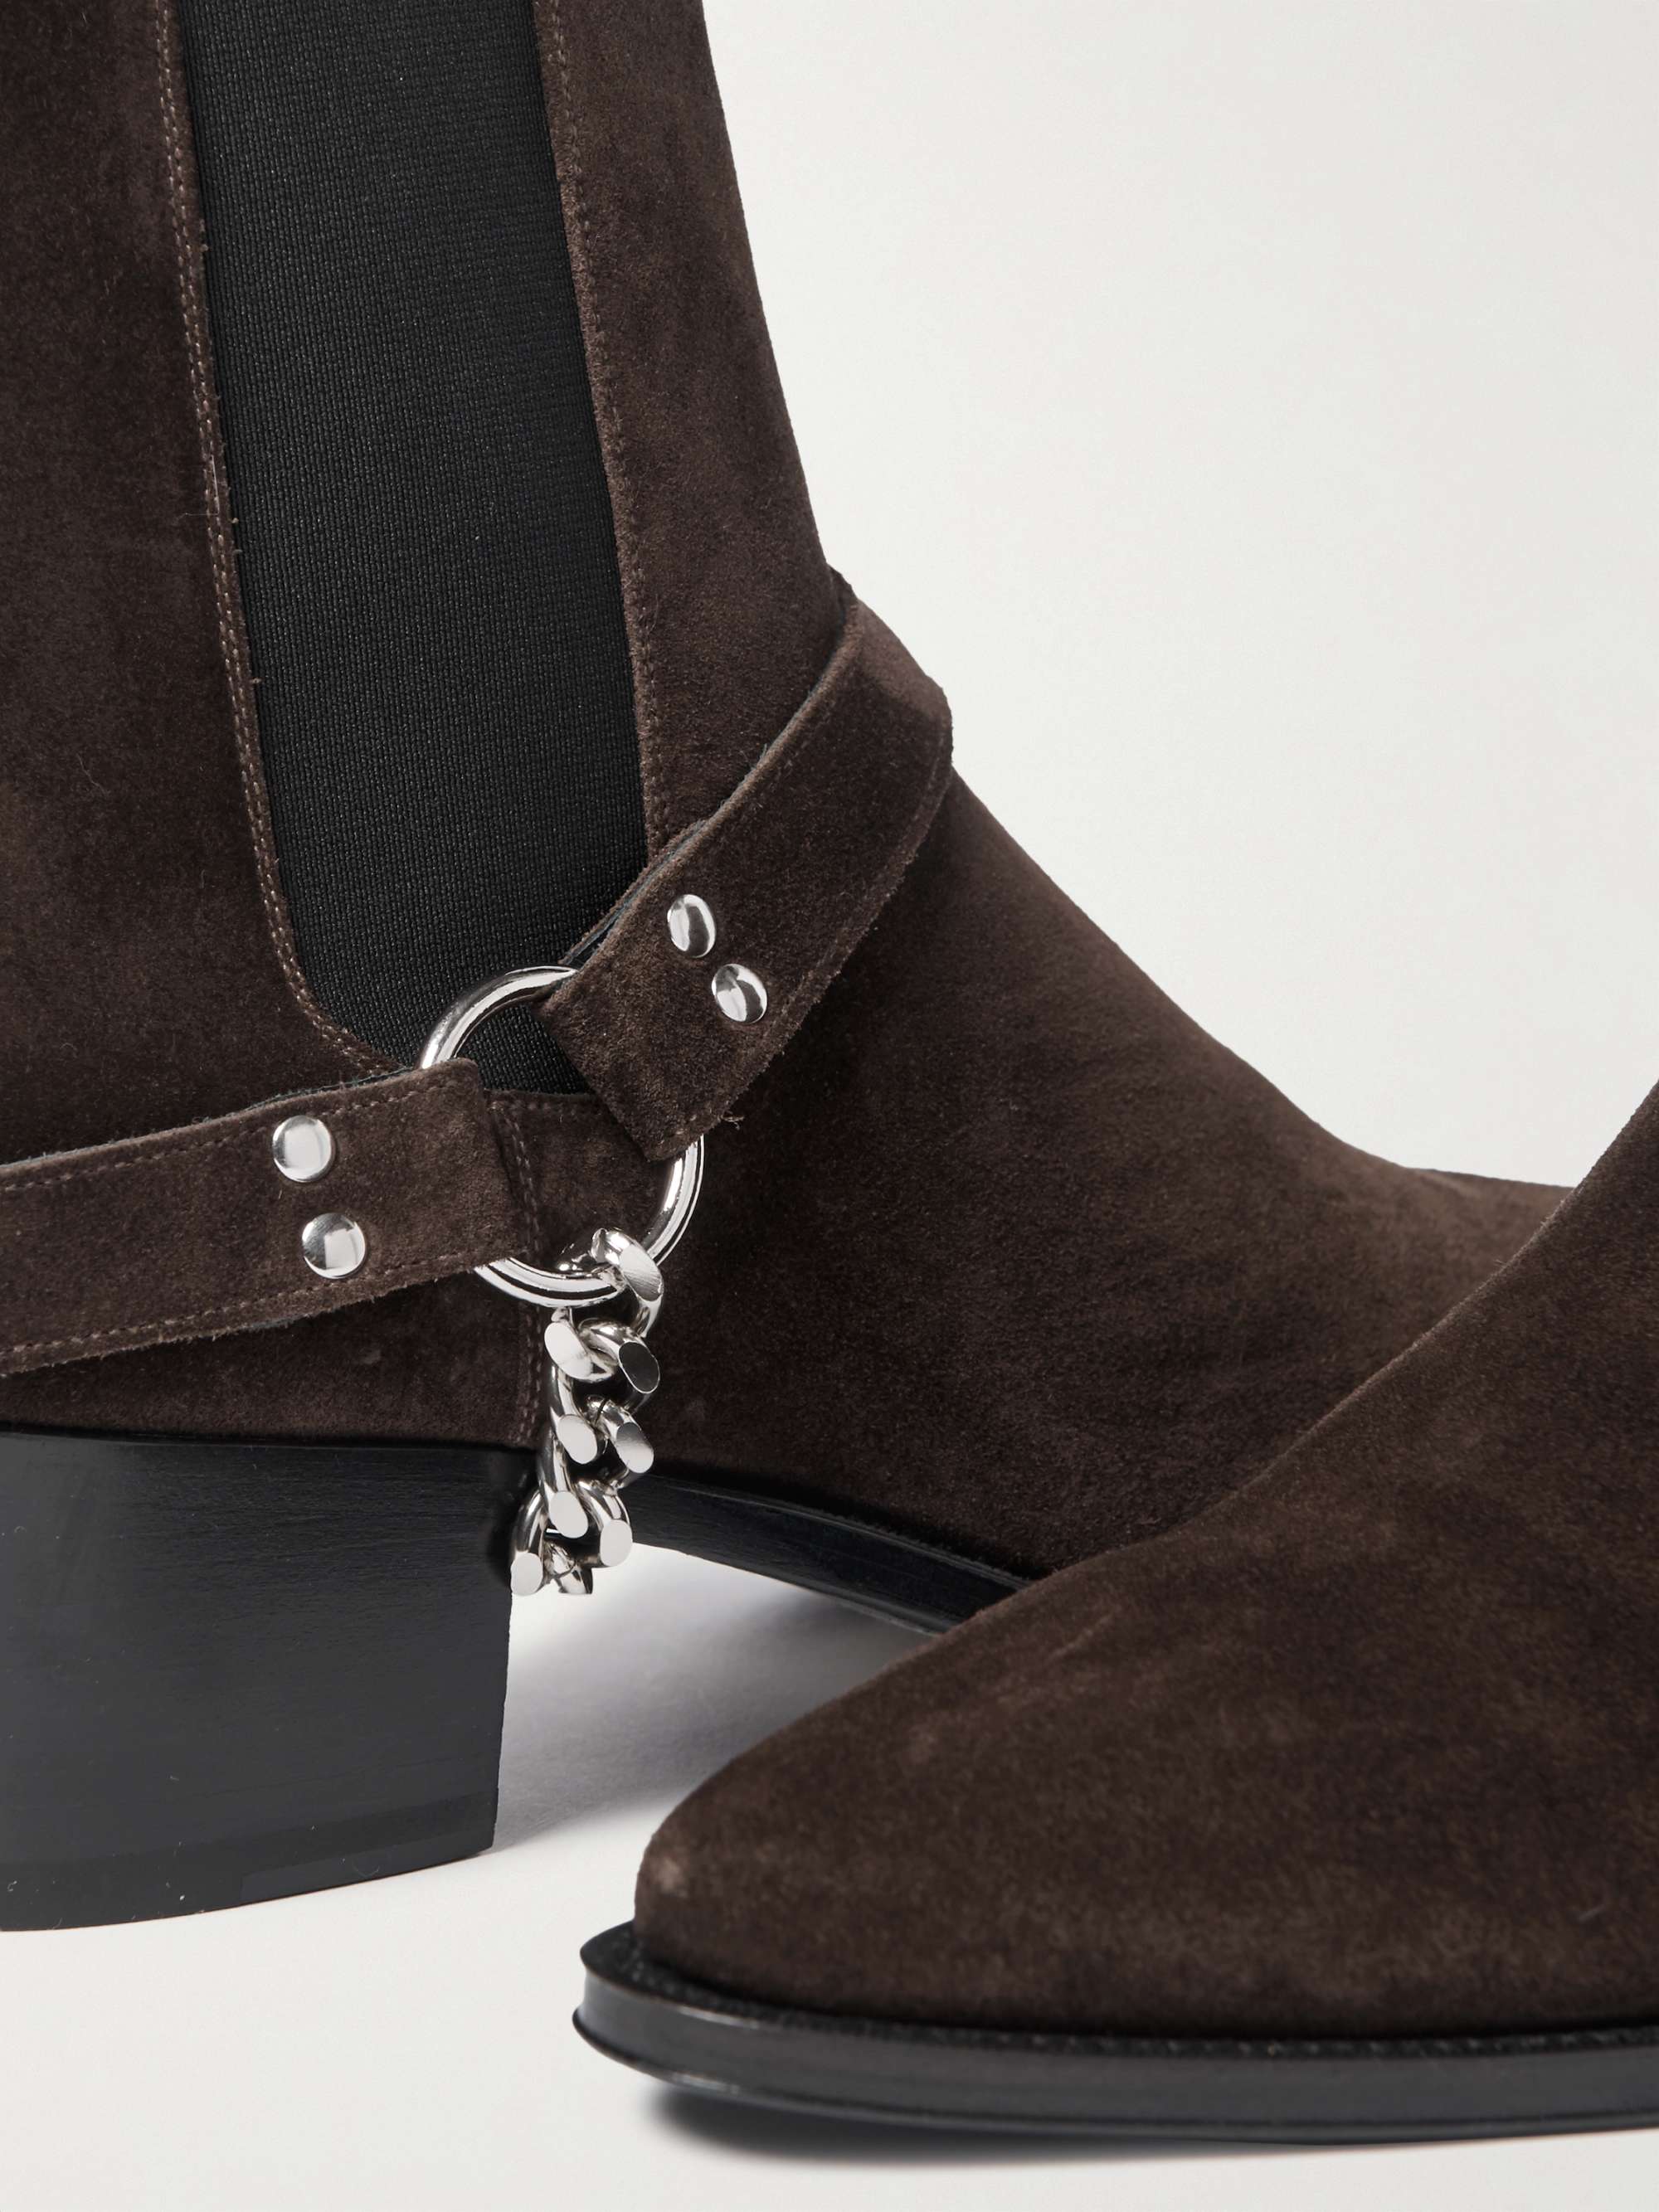 CELINE HOMME Chain-Embellished Suede Chelsea Boots